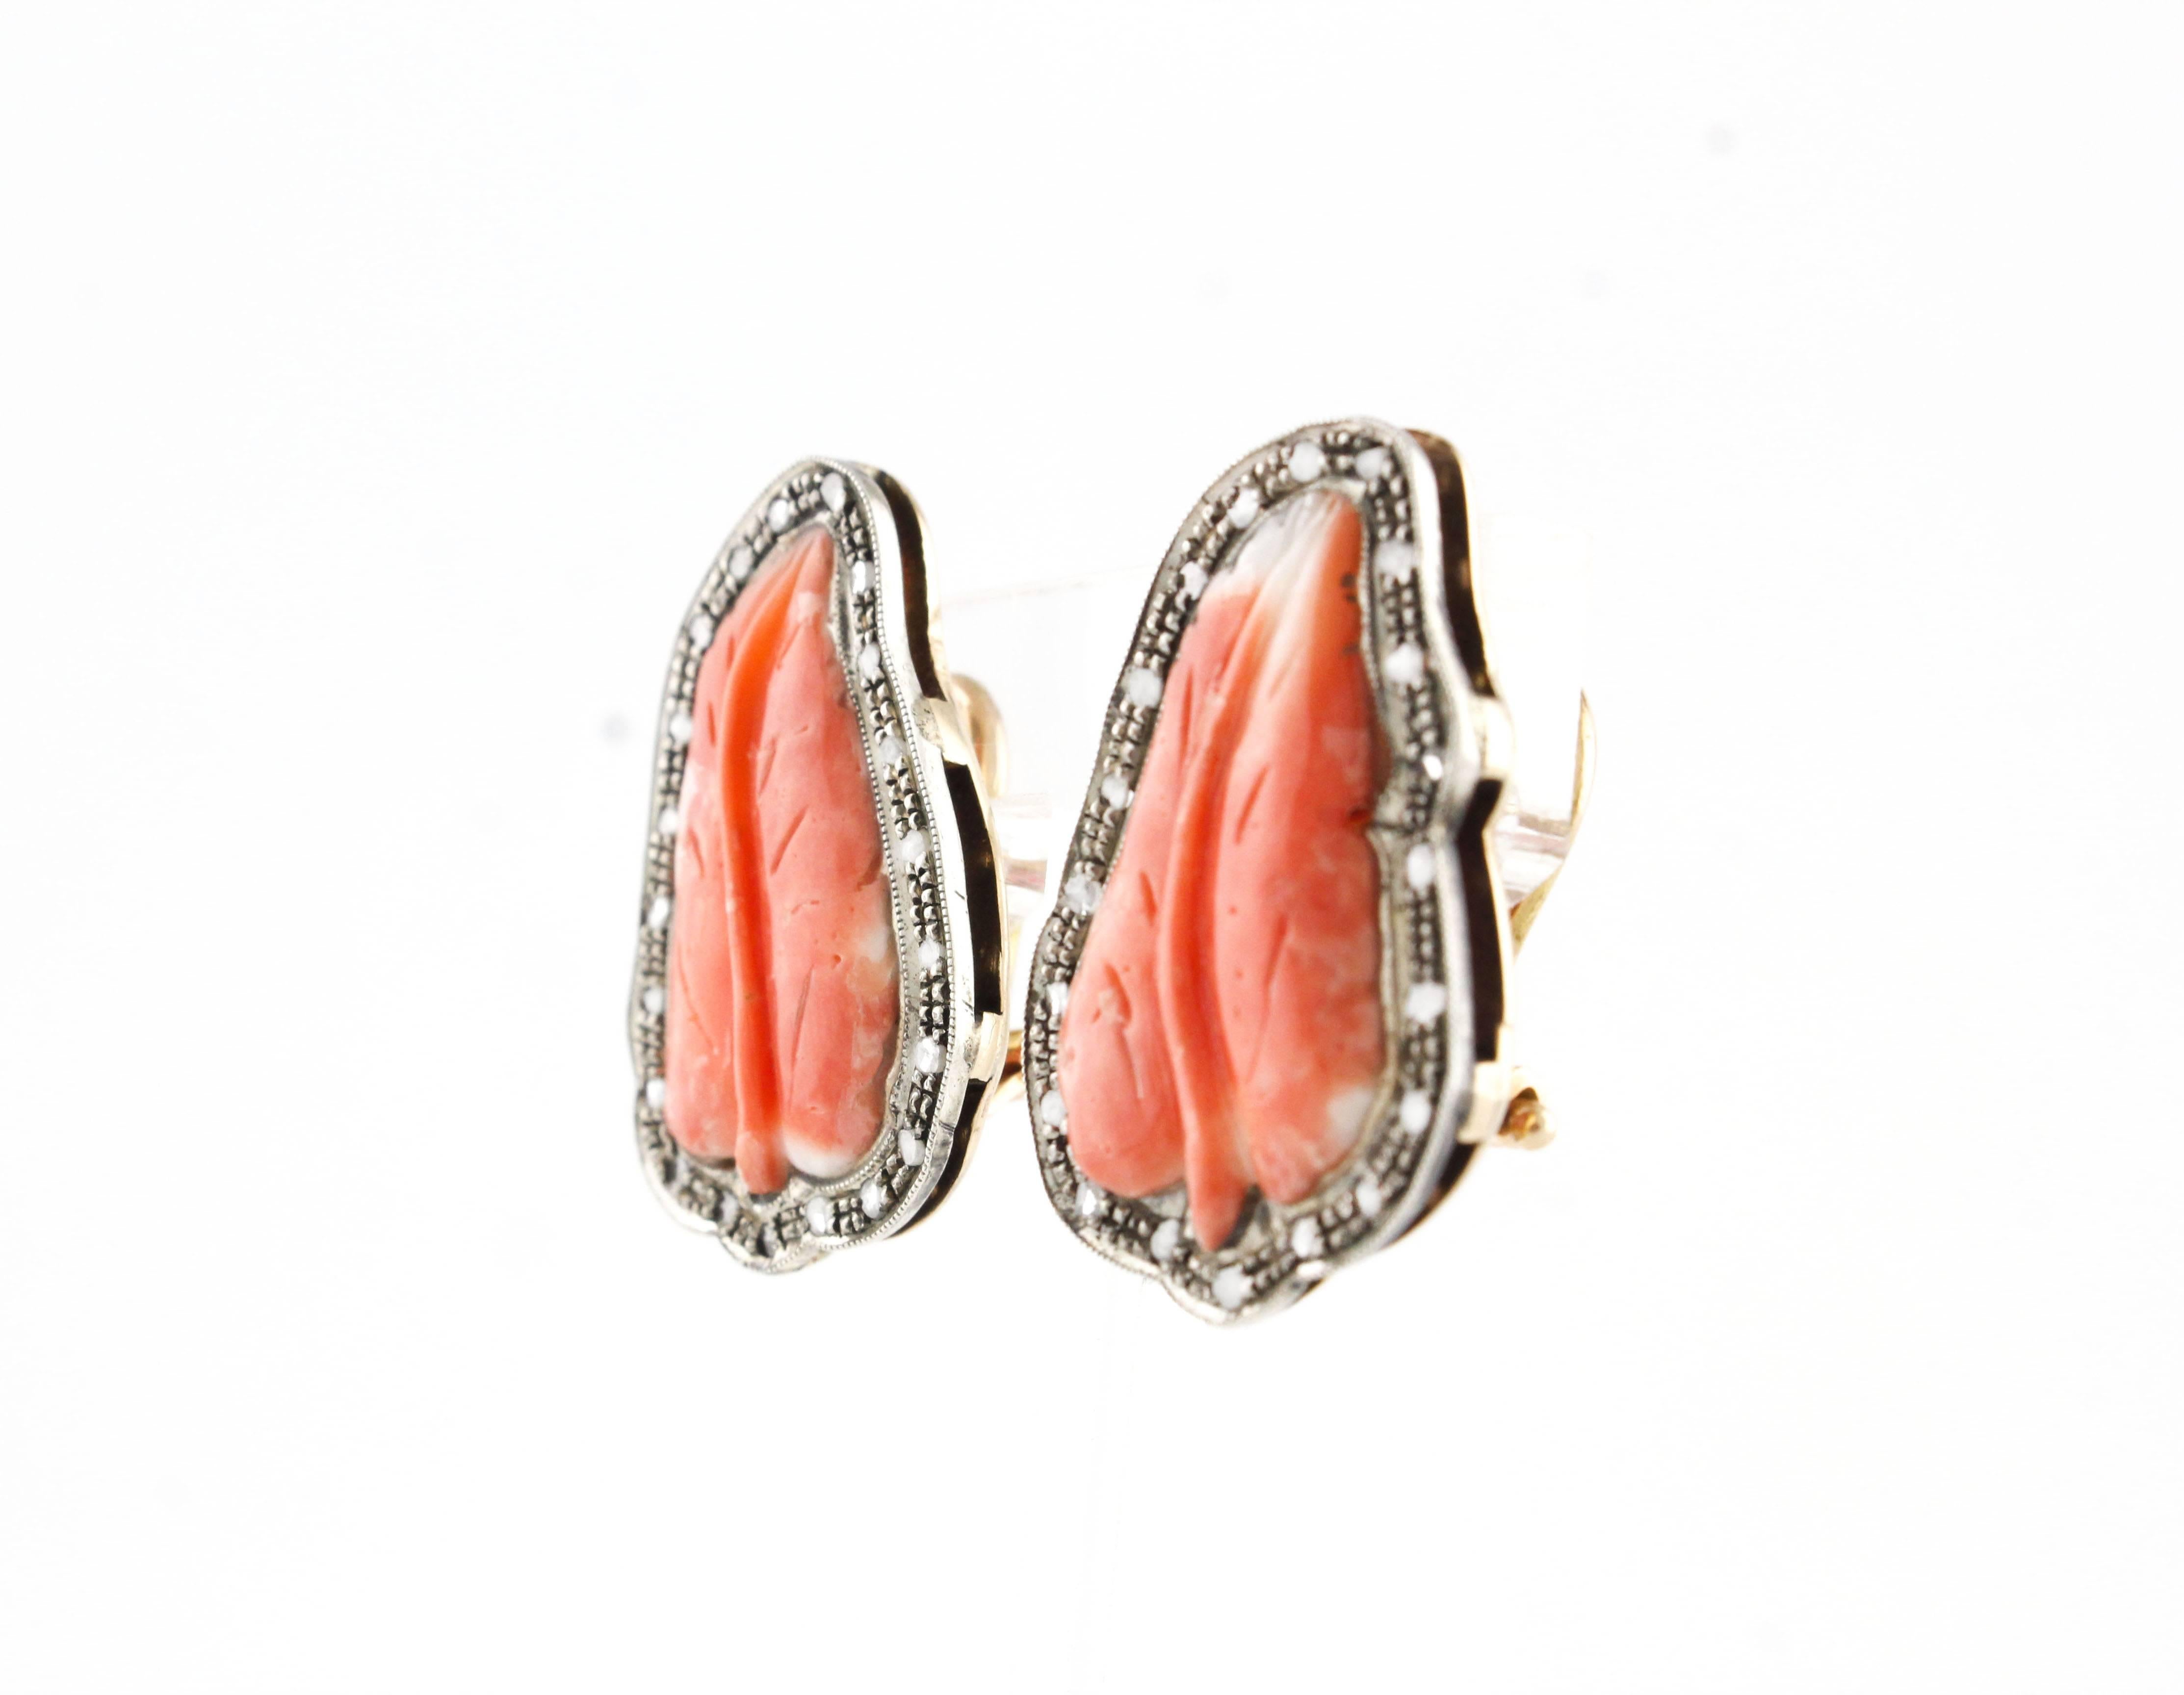 Charming 11.40 g rose gold 14 kt silver earrings and engraved leaf on coral secundum of 1.40 g, surrounded by a coronet of diamonds that make these beautiful earrings shine even more.
Diamonds 0.35 ct
Coral 1.40 g
Total weight 11.40 g
R.F garu

For